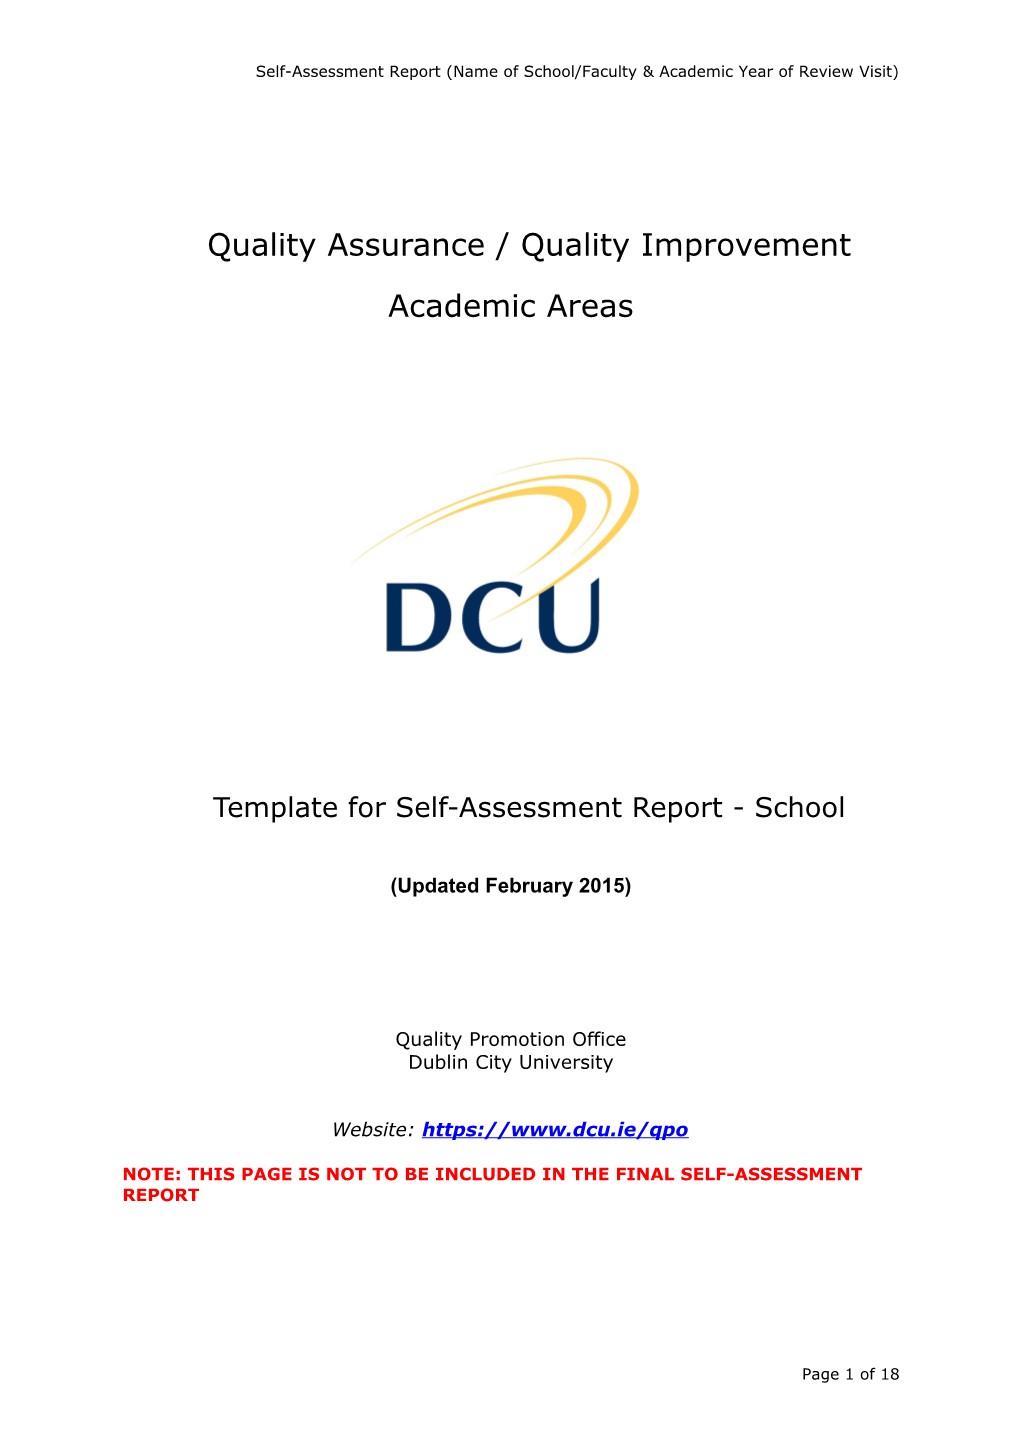 Self-Assessment Report (Name of School/Faculty & Academic Year of Review Visit)